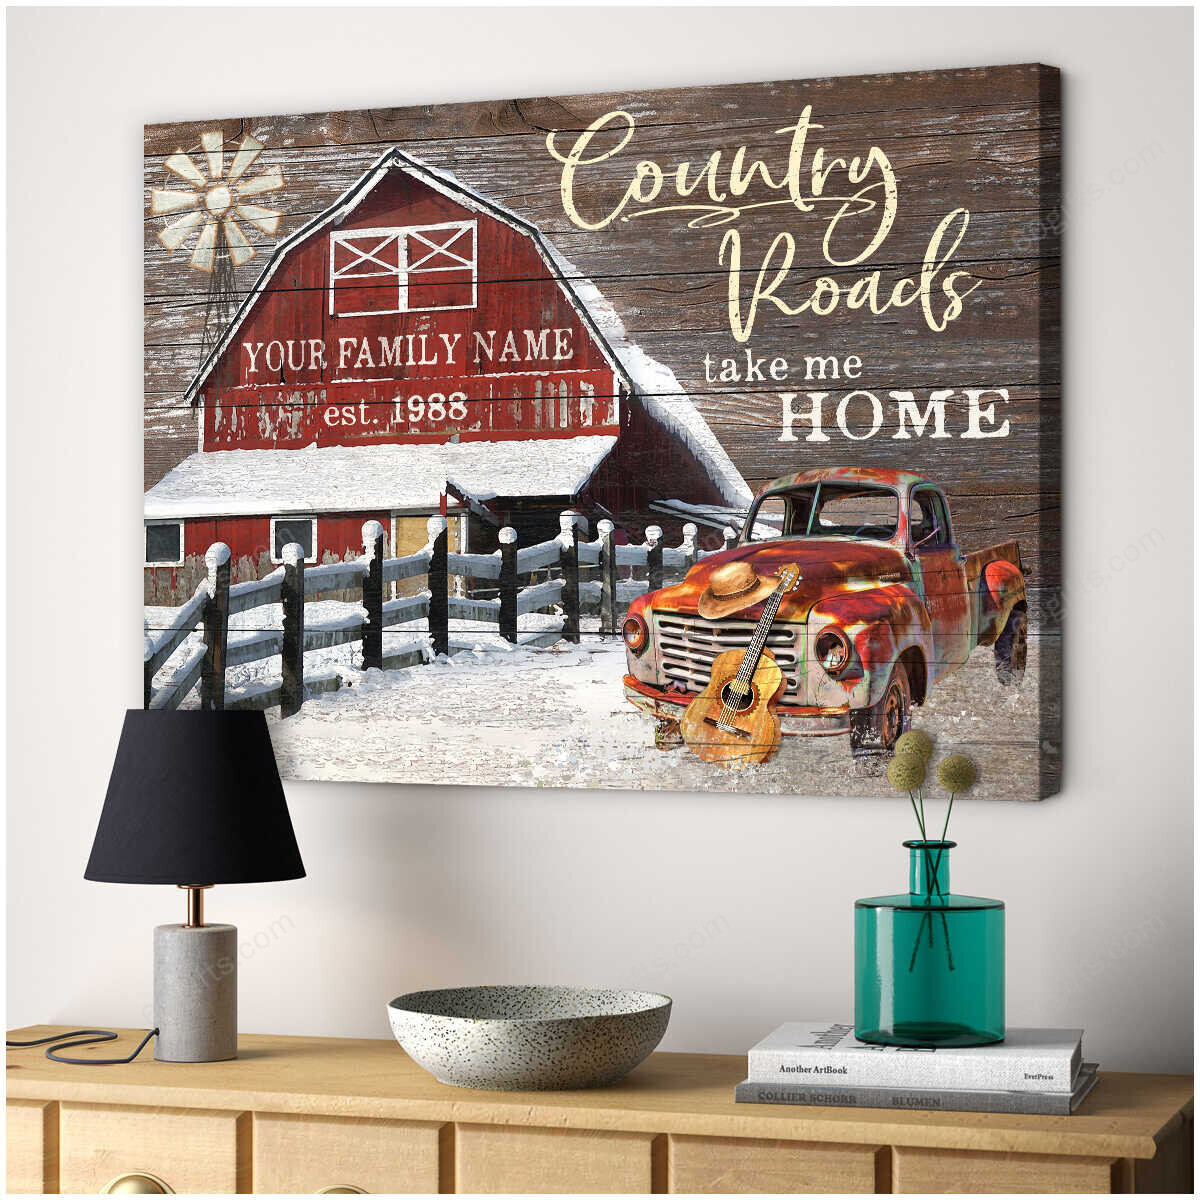 Personalized Name Valentine's Day Gifts Country Road Anniversary Wedding Present - Customized Barn Canvas Print Wall Art Home Decor